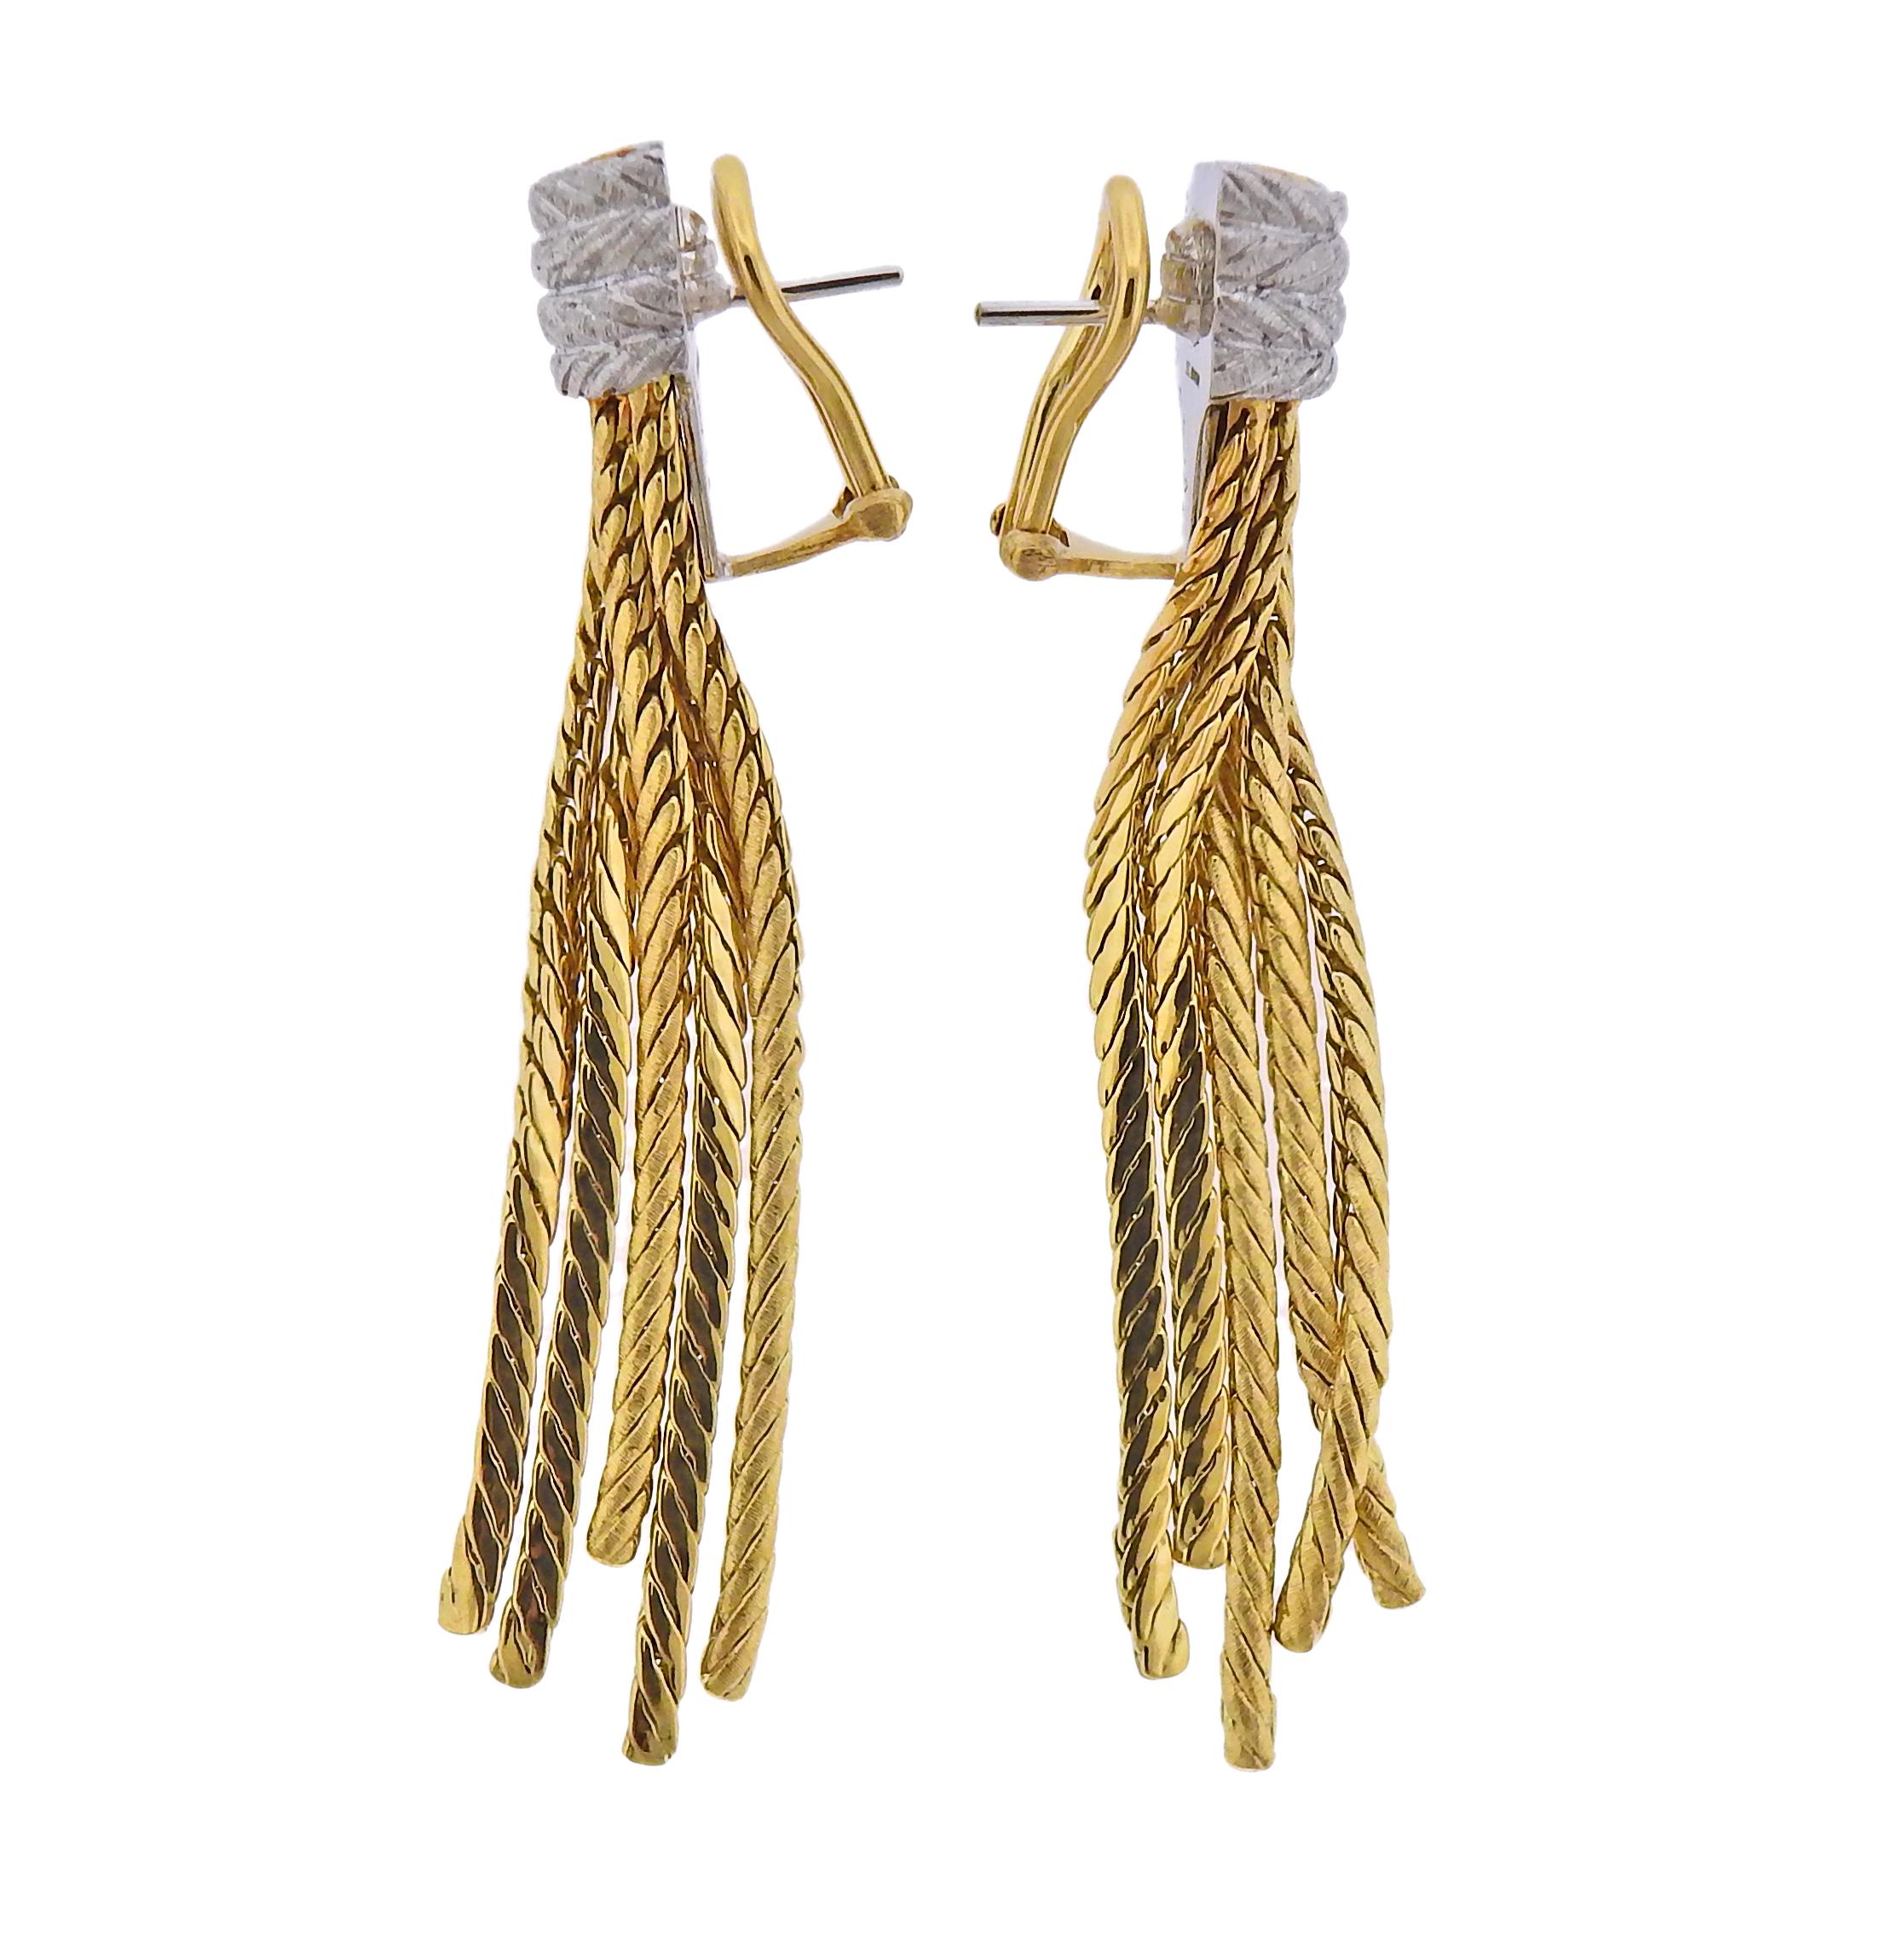 Pair of Buccellati 18k gold tassel drop earrings. Come with Buccellati paperwork. Retail $9800. Earrings are 65mm long.  Weight - 28.5 grams. Marked: Gianmaria Buccellati, Italy, 18kt, BL.